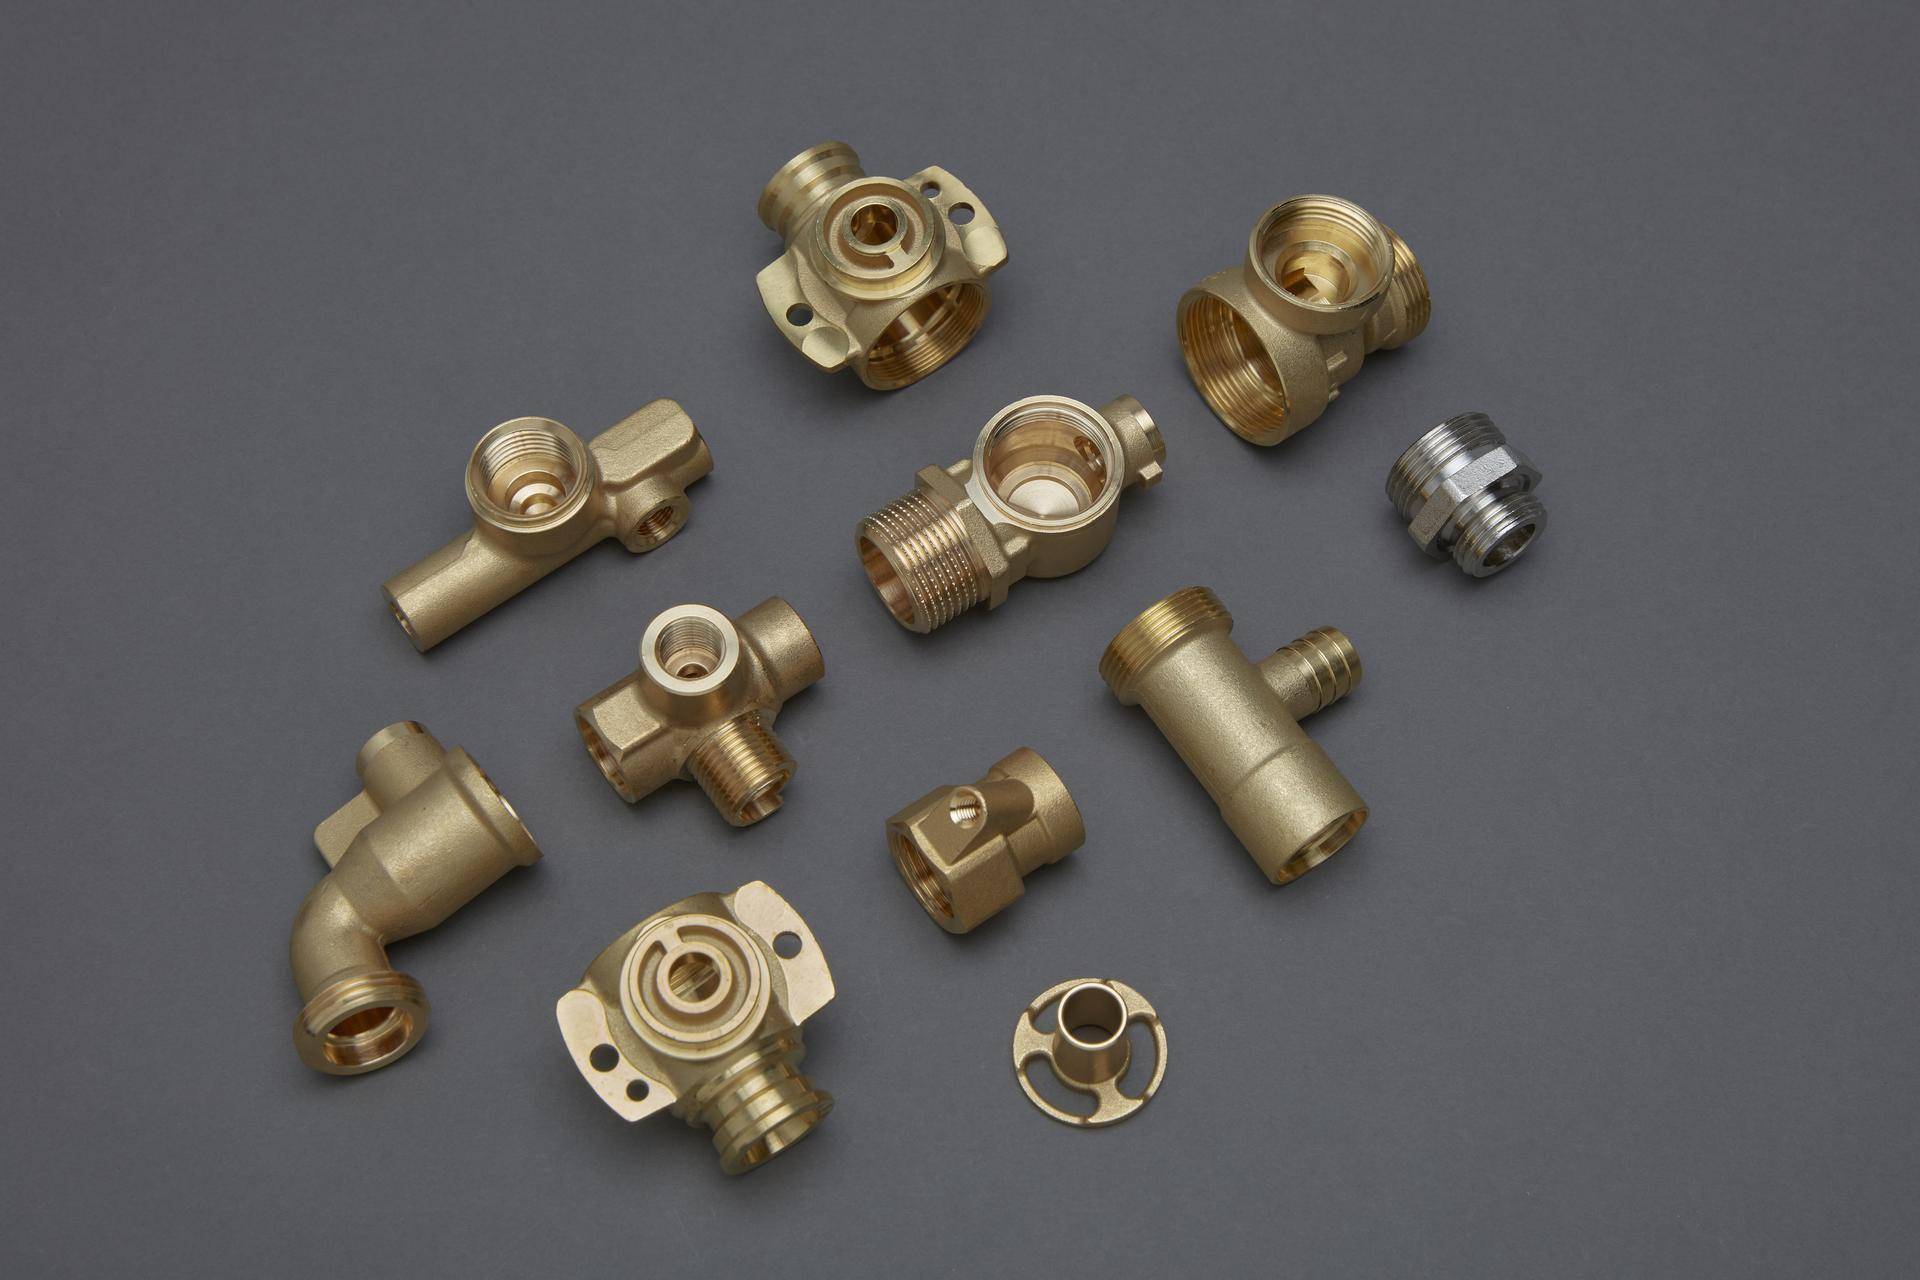 Components for valves and taps